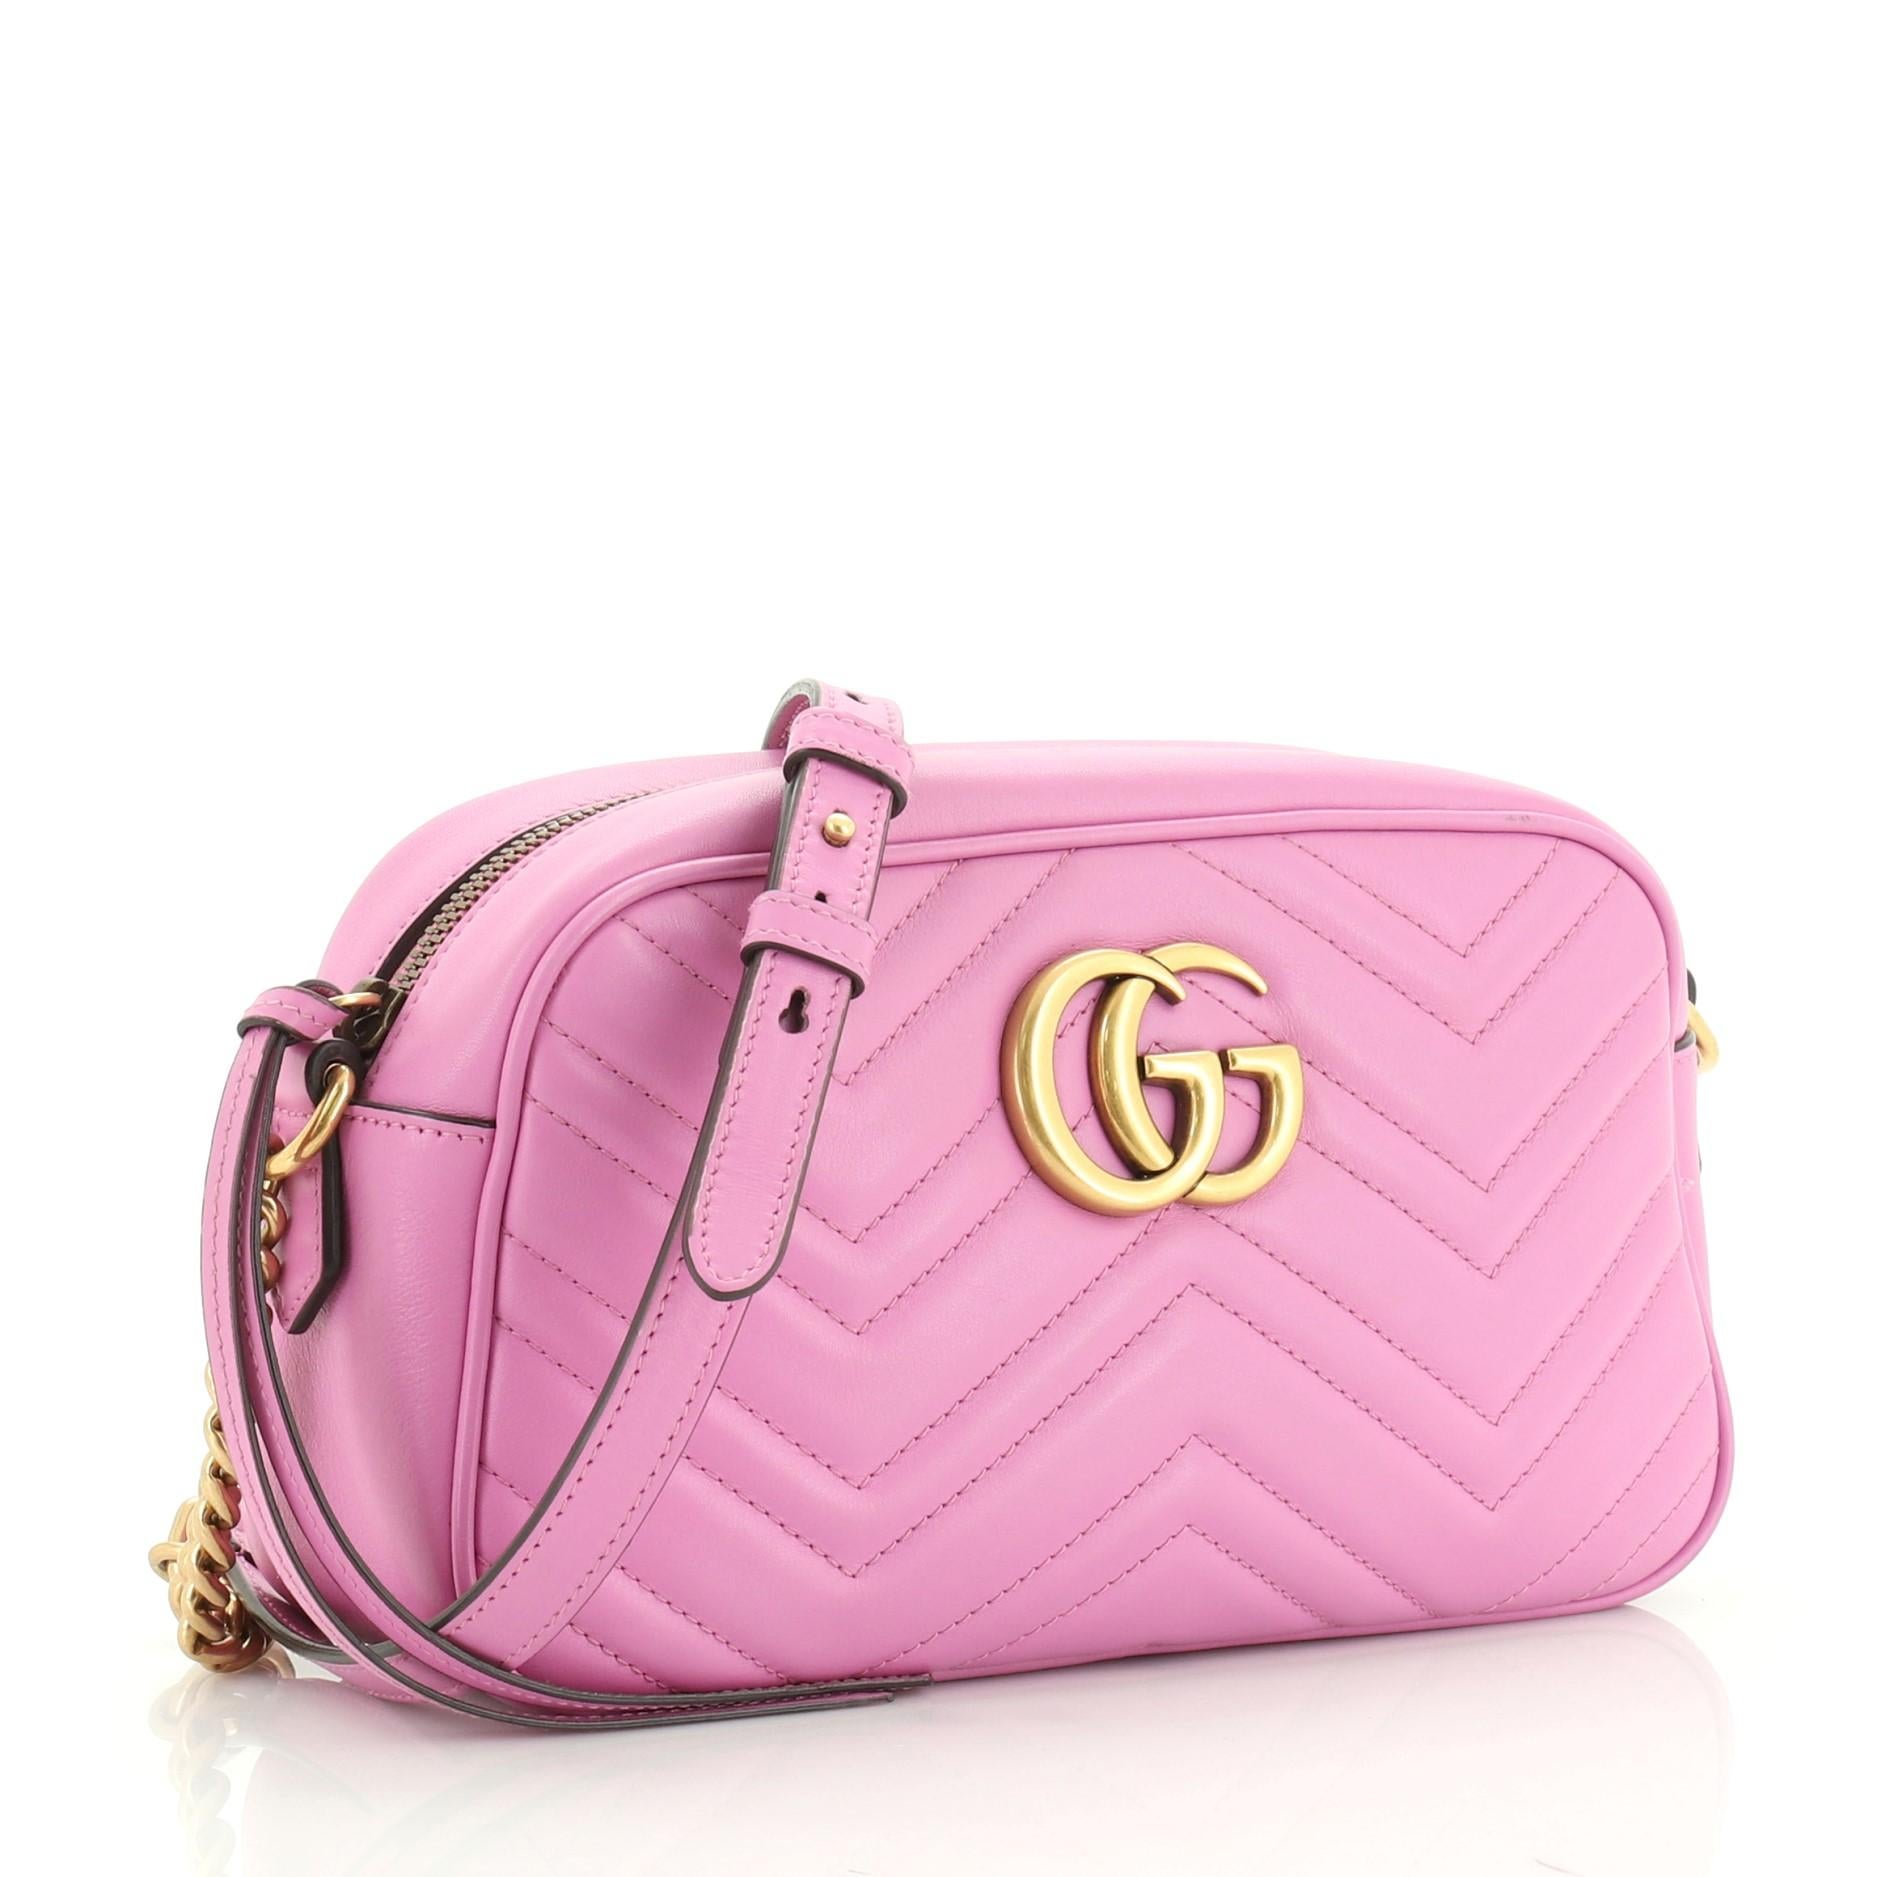 This Gucci GG Marmont Shoulder Bag Matelasse Leather Small, crafted from pink matelasse leather, features a leather strap with chain links, GG logo at the front, and aged gold-tone hardware. Its zip closure opens to a neutral microfiber interior